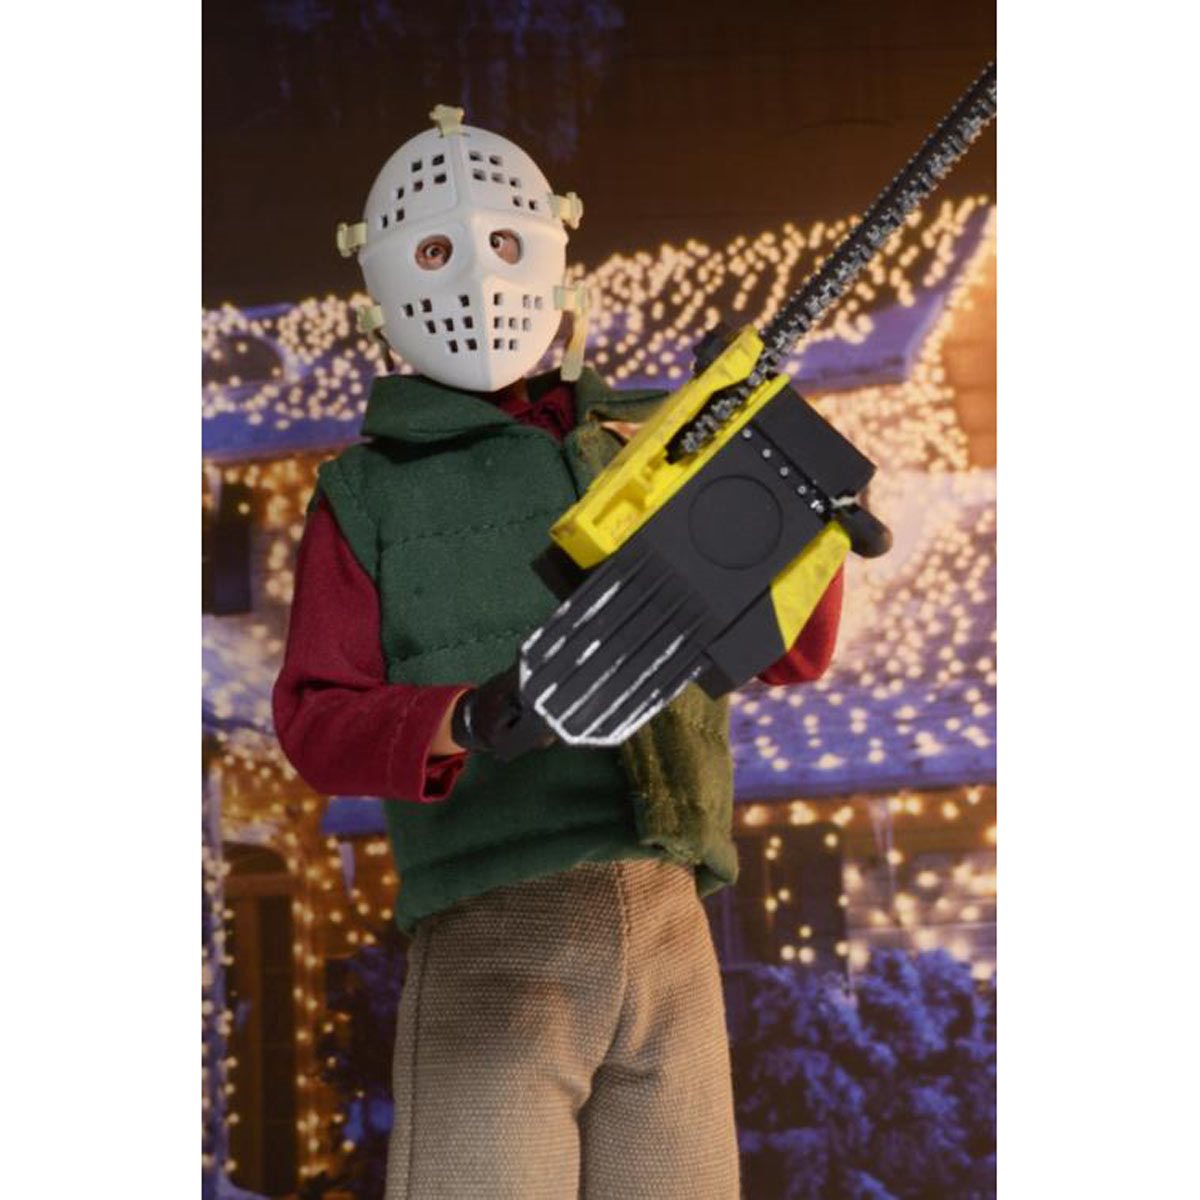 NECA - Christmas Vacation - Chainsaw Clark 8" Clothed Action Figure - Zlc Collectibles